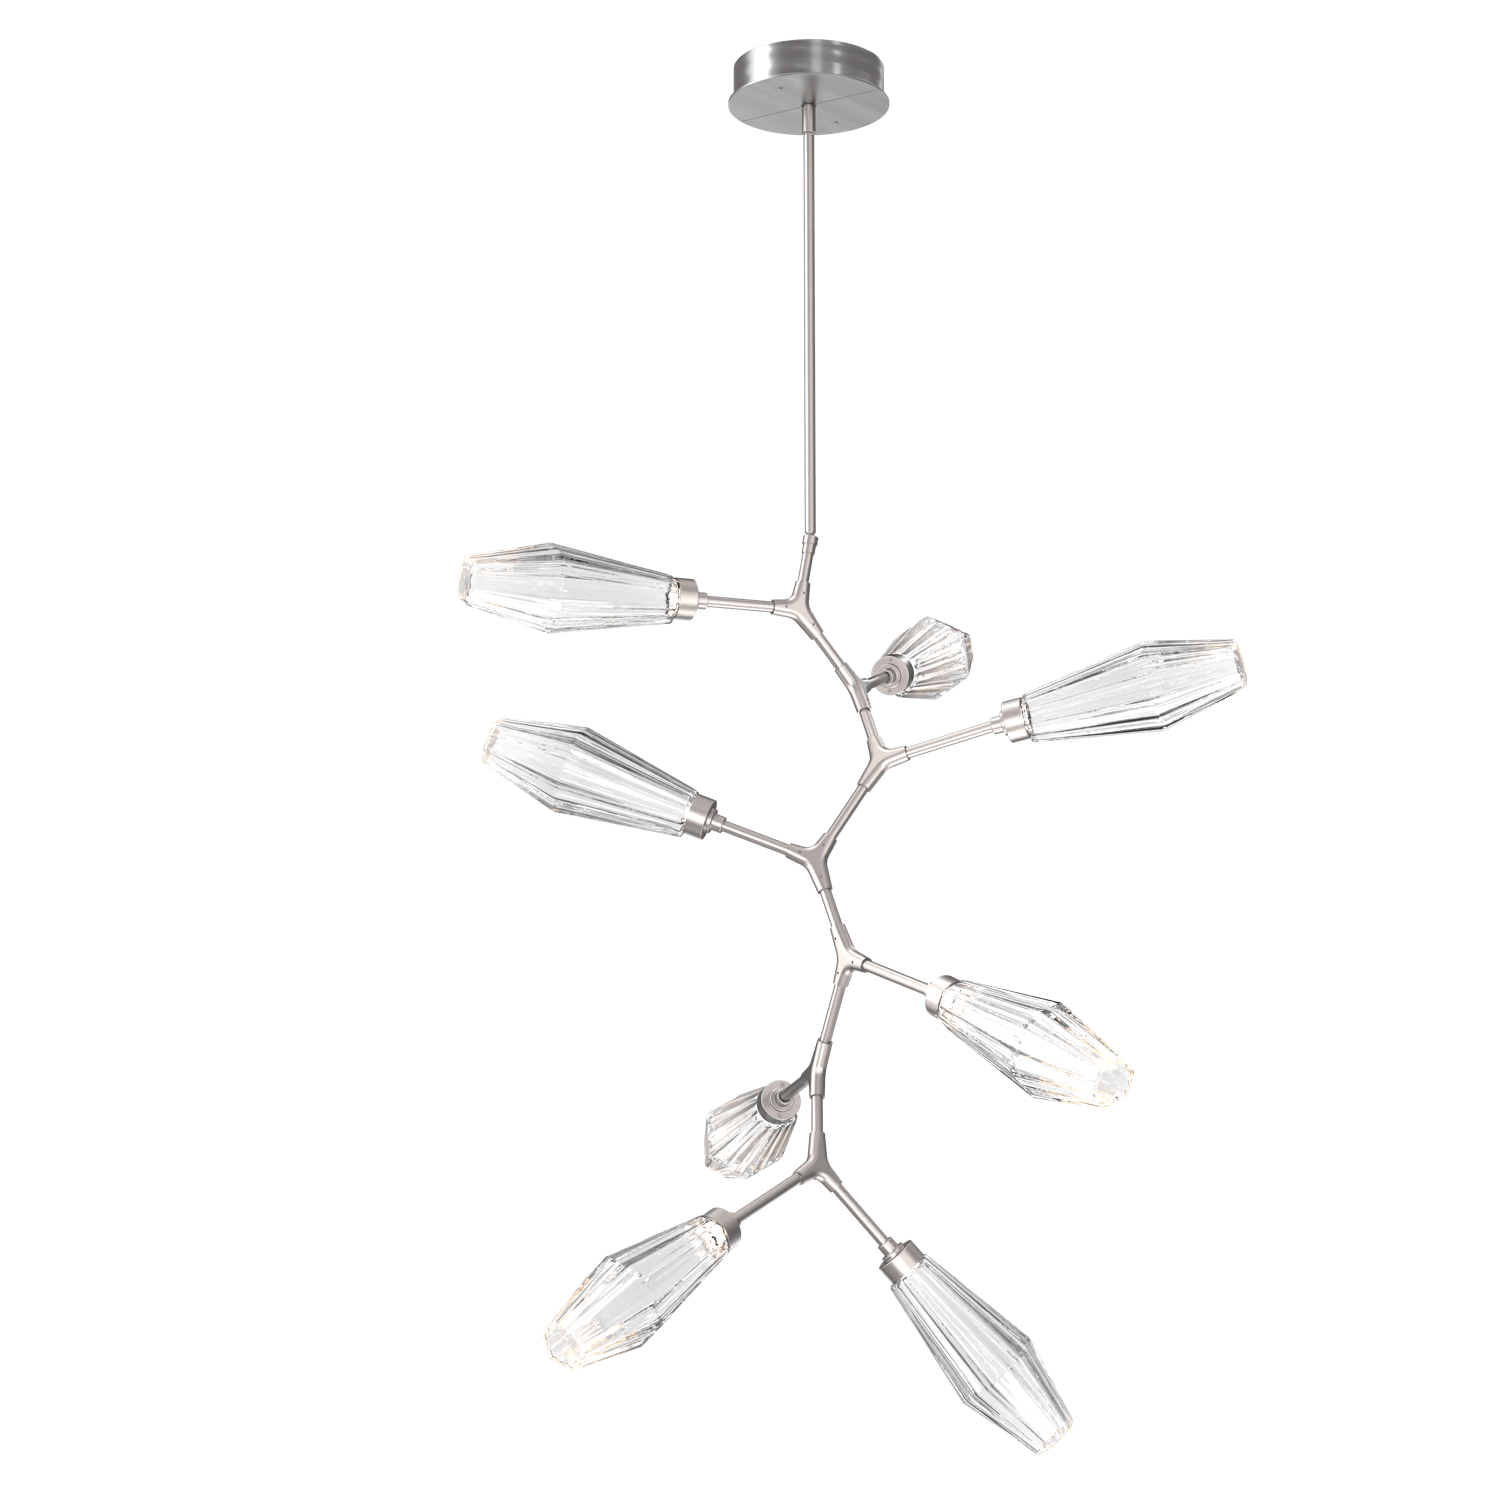 CHB0049-VB-SN-RC-Hammerton-Studio-Aalto-8-light-modern-vine-chandelier-with-satin-nickel-finish-and-optic-ribbed-clear-glass-shades-and-LED-lamping